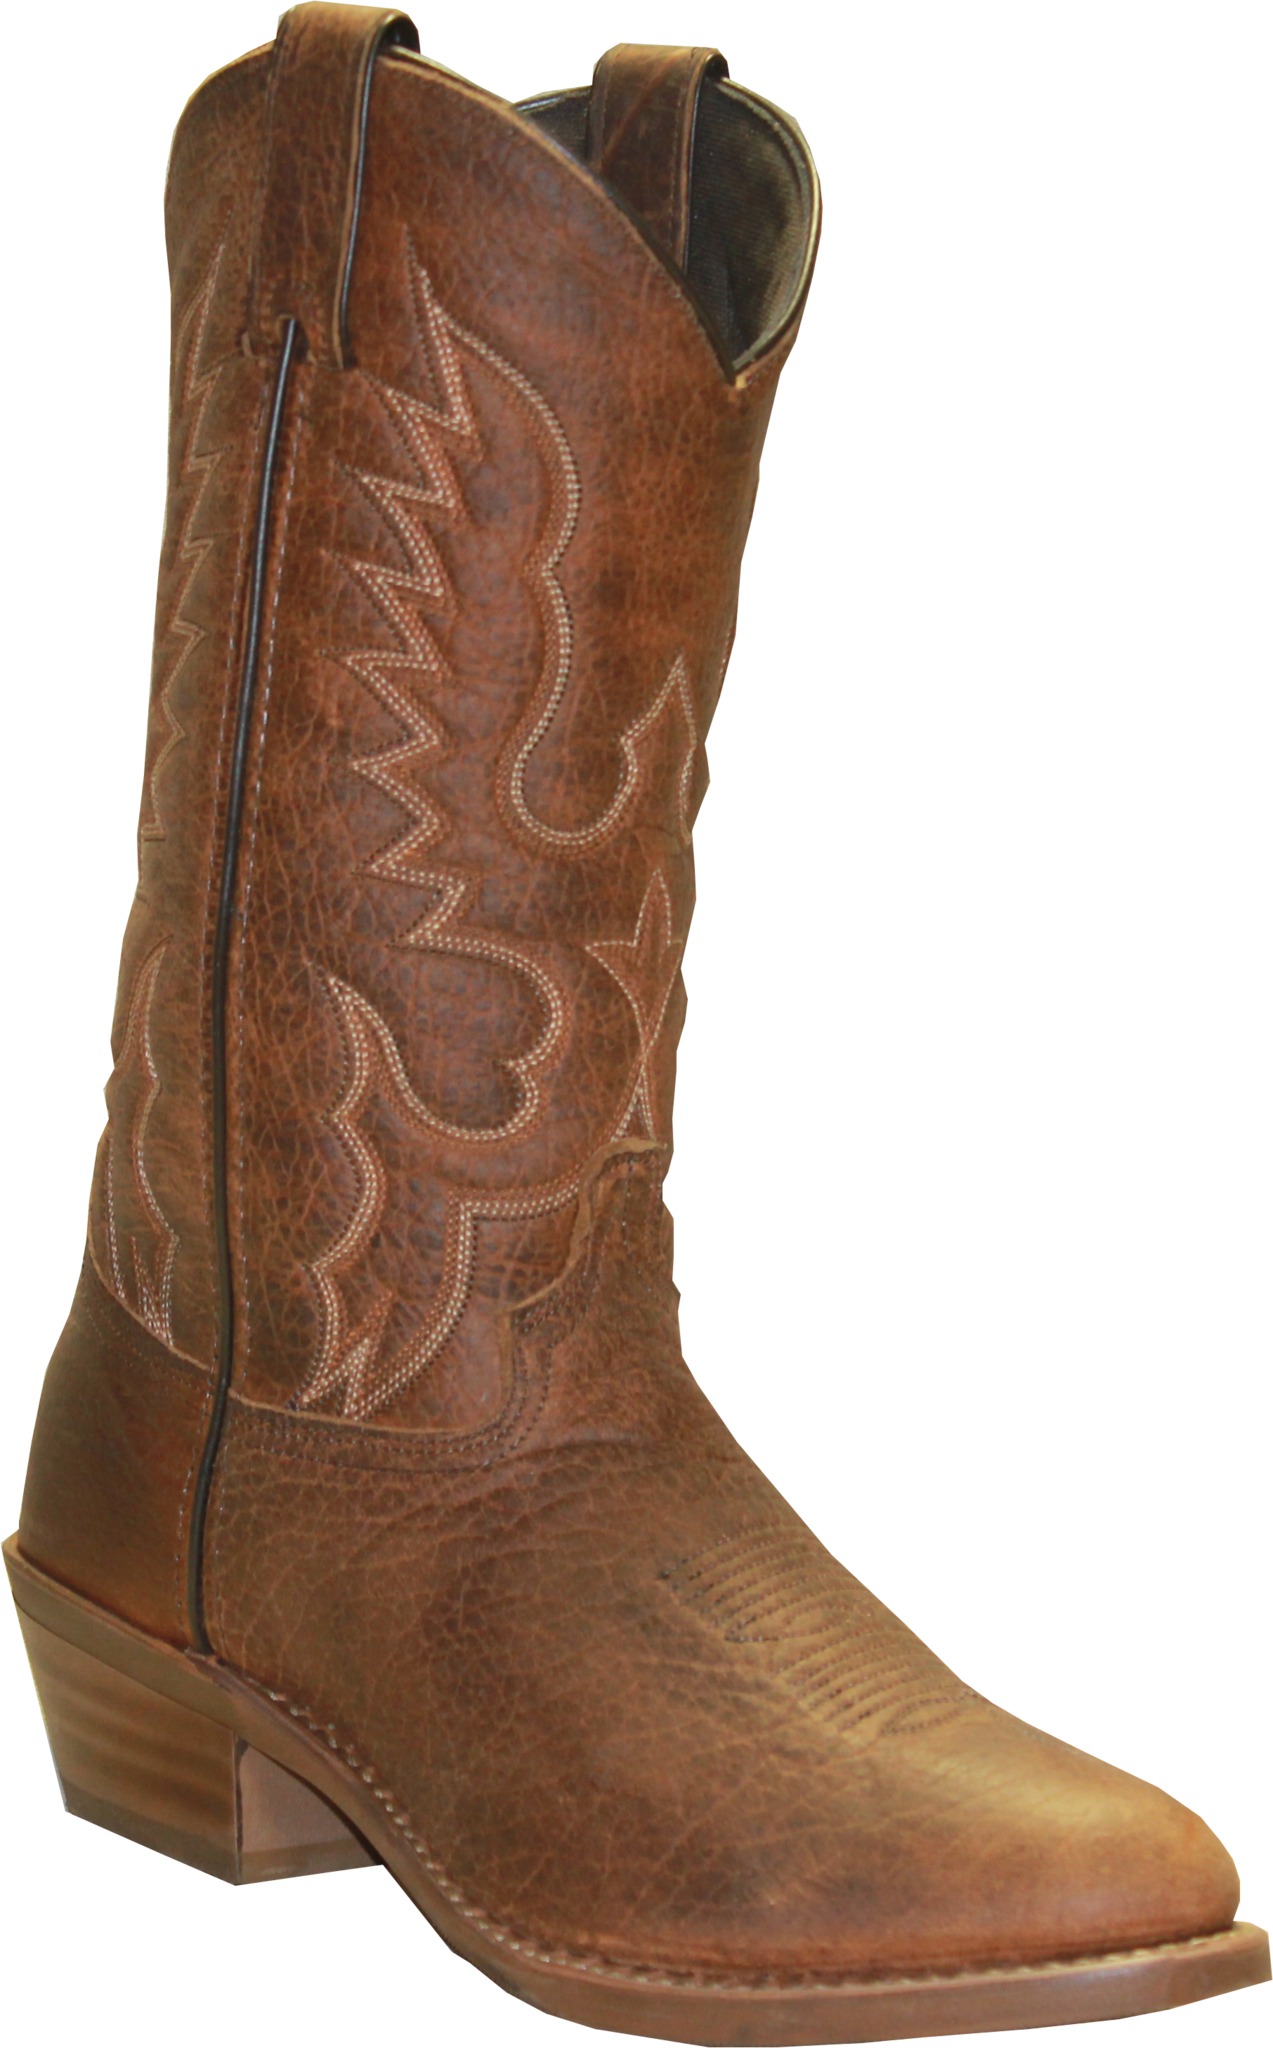 traditional cowboy boots